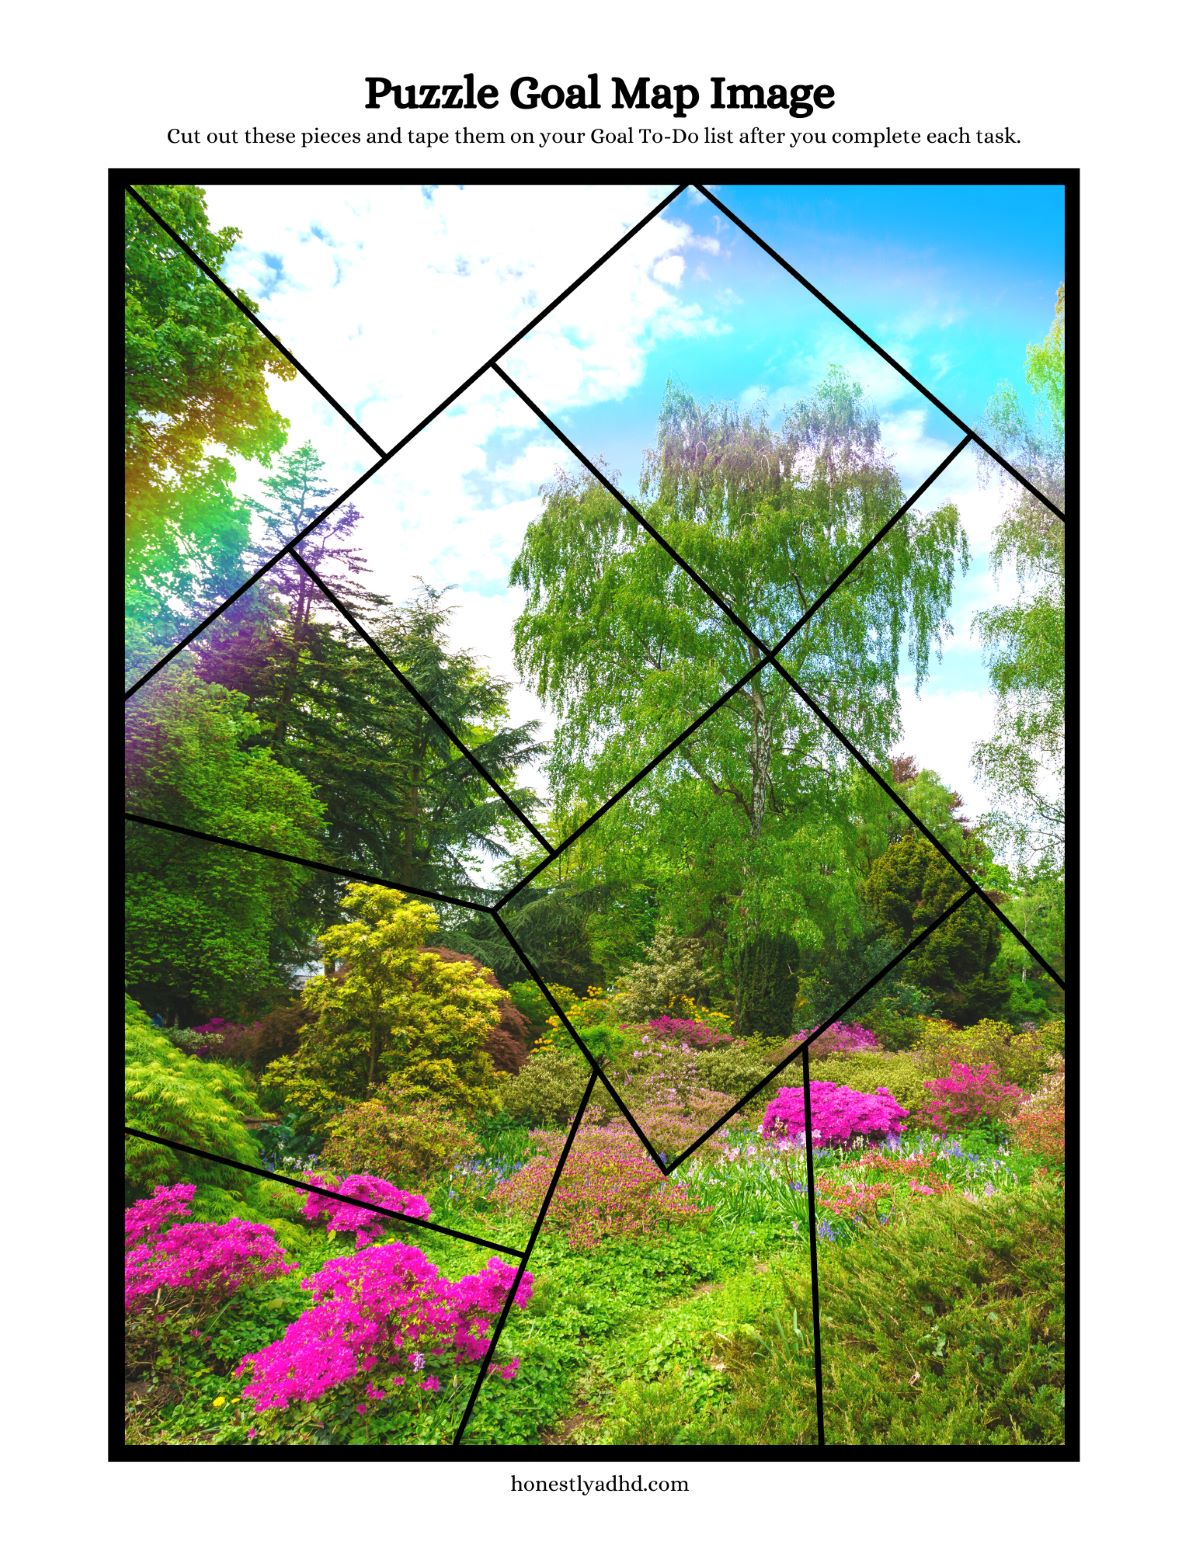 An example puzzle image of a beautiful nature scene.